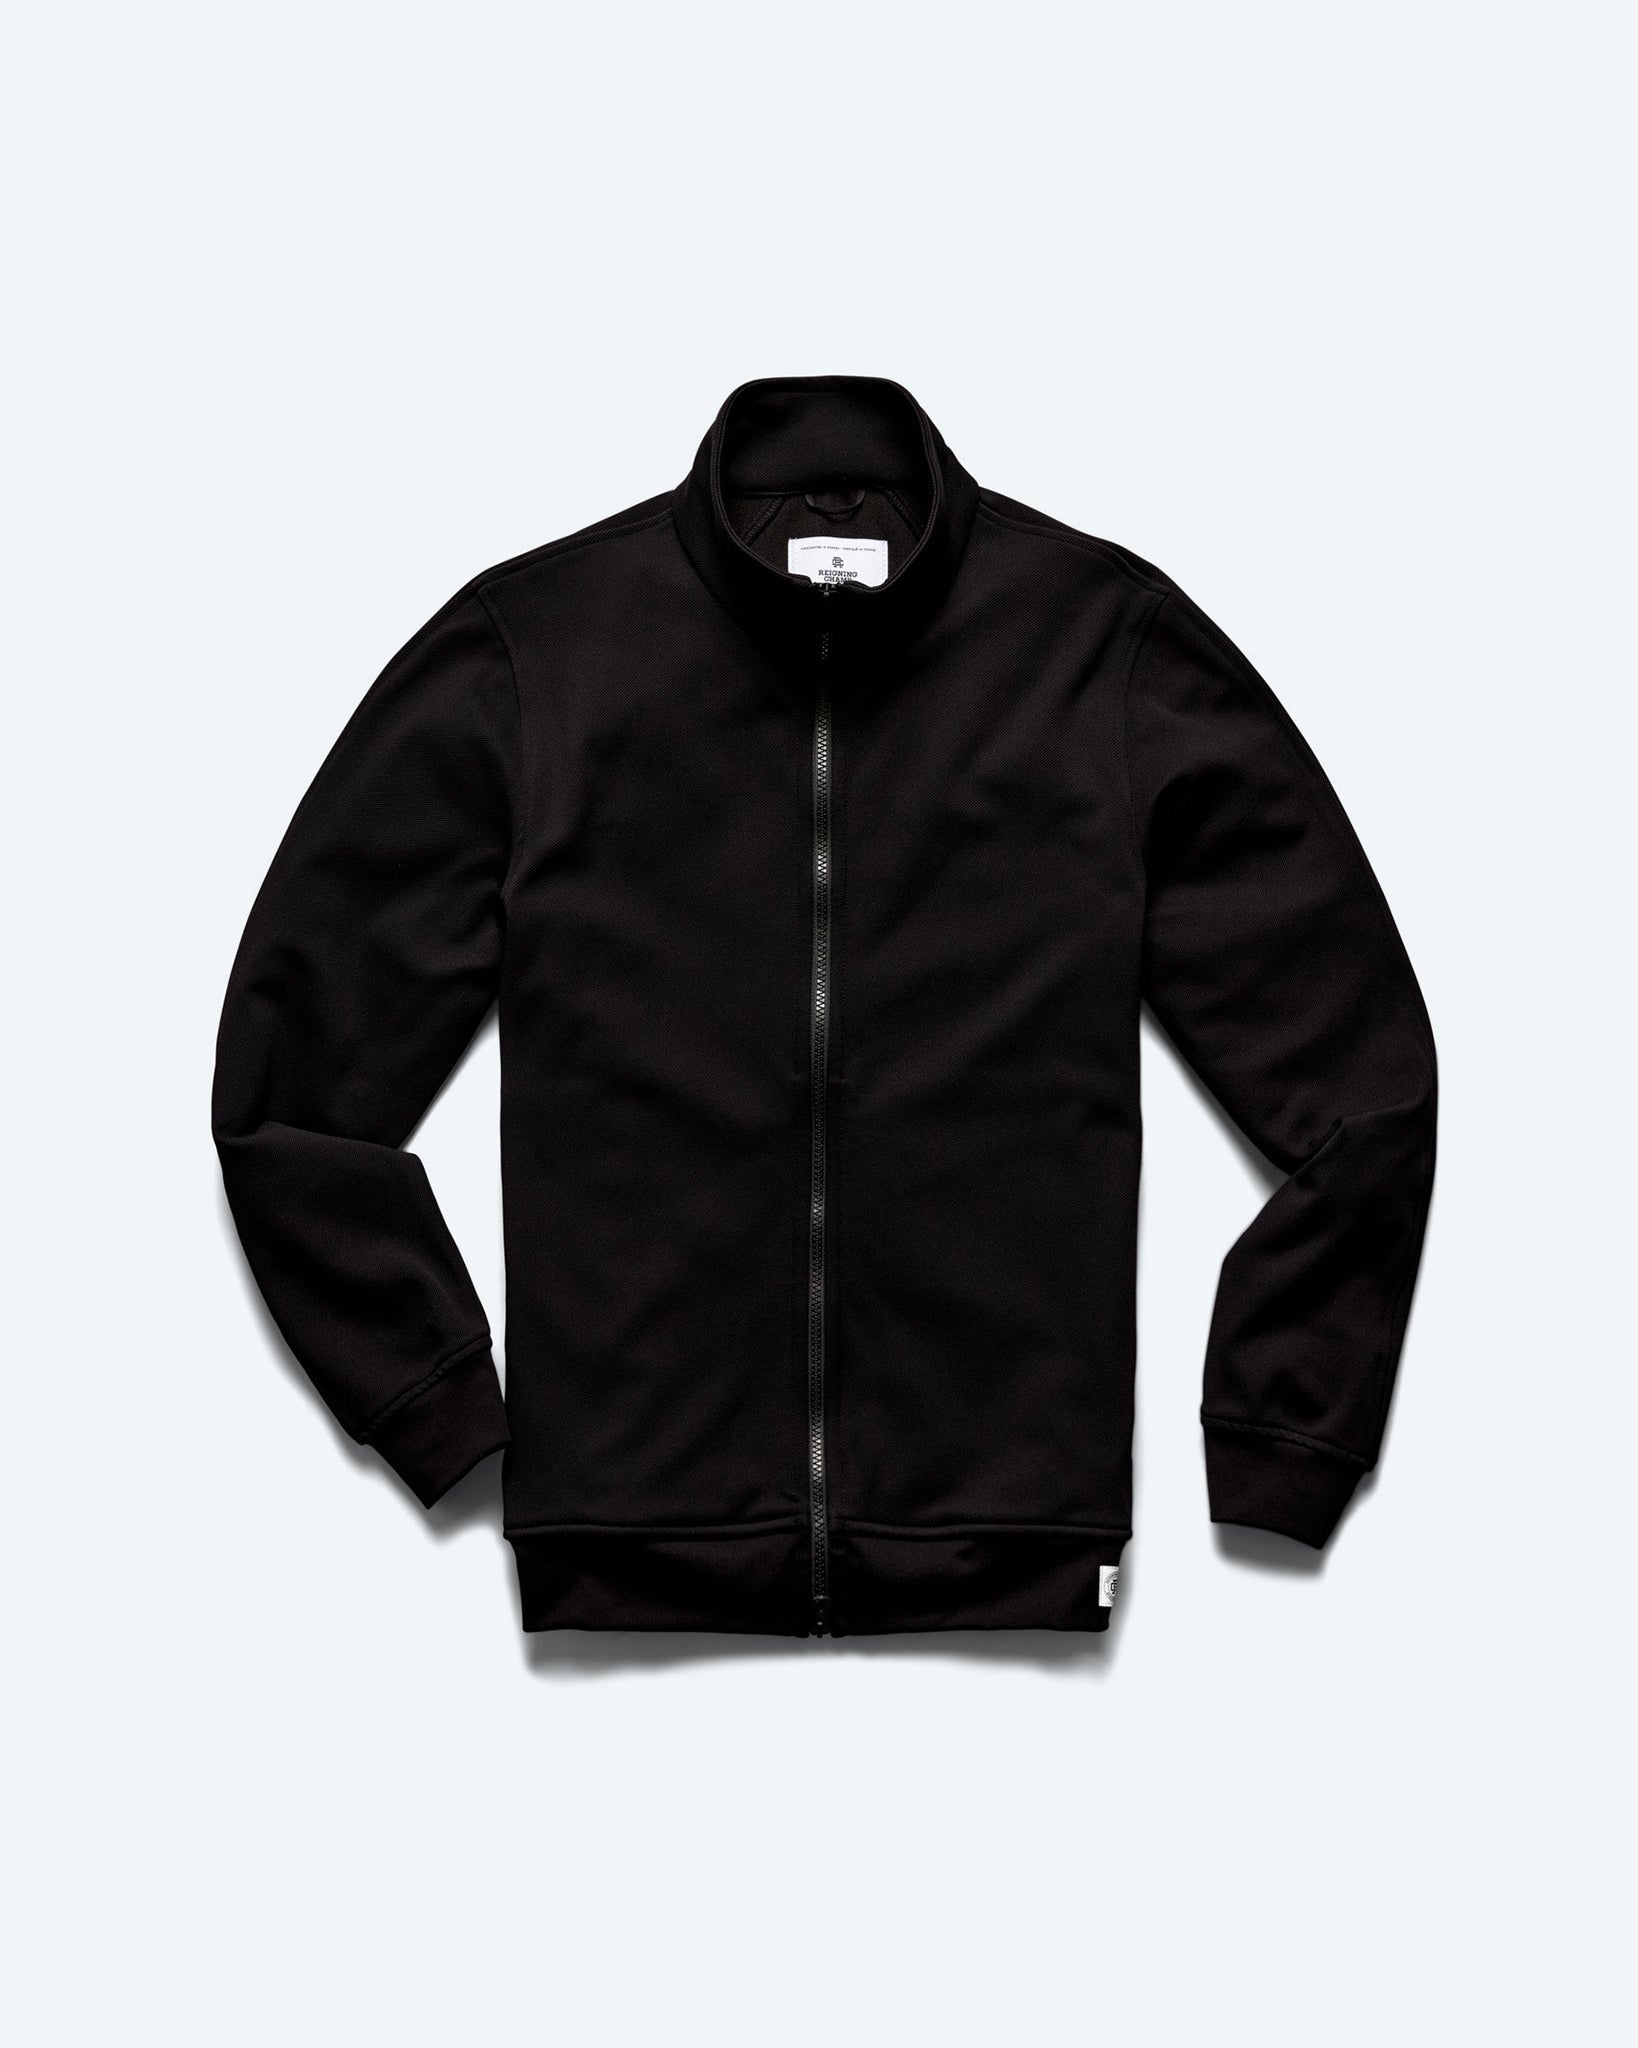 Men's Jackets and Outerwear | Coats, Puffers & Vests | Reigning Champ